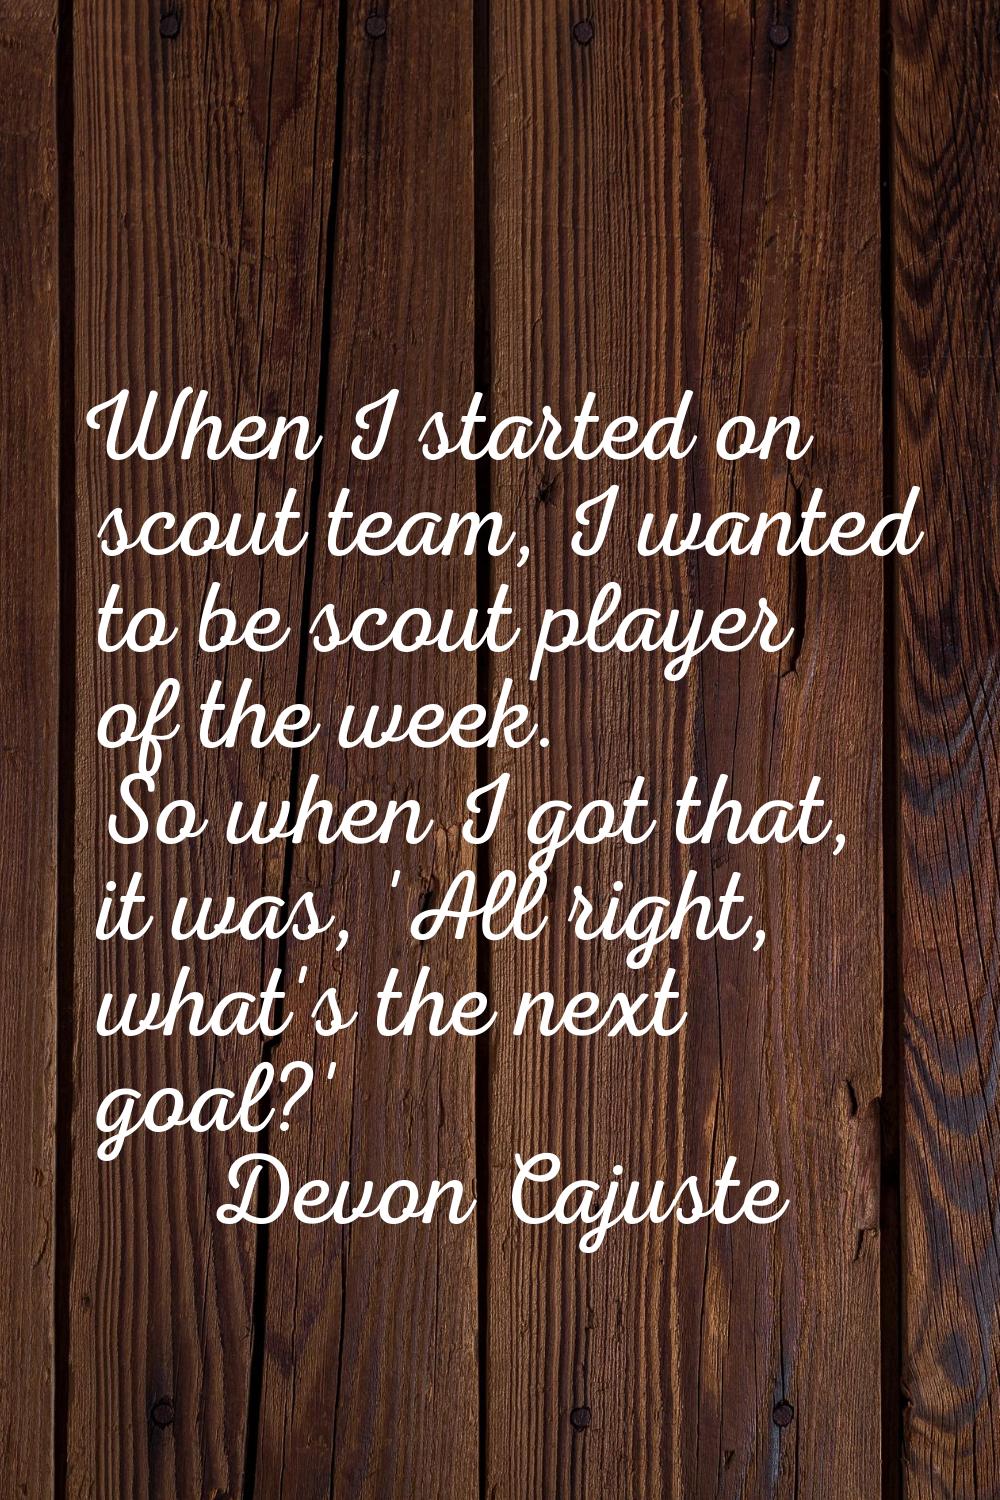 When I started on scout team, I wanted to be scout player of the week. So when I got that, it was, 